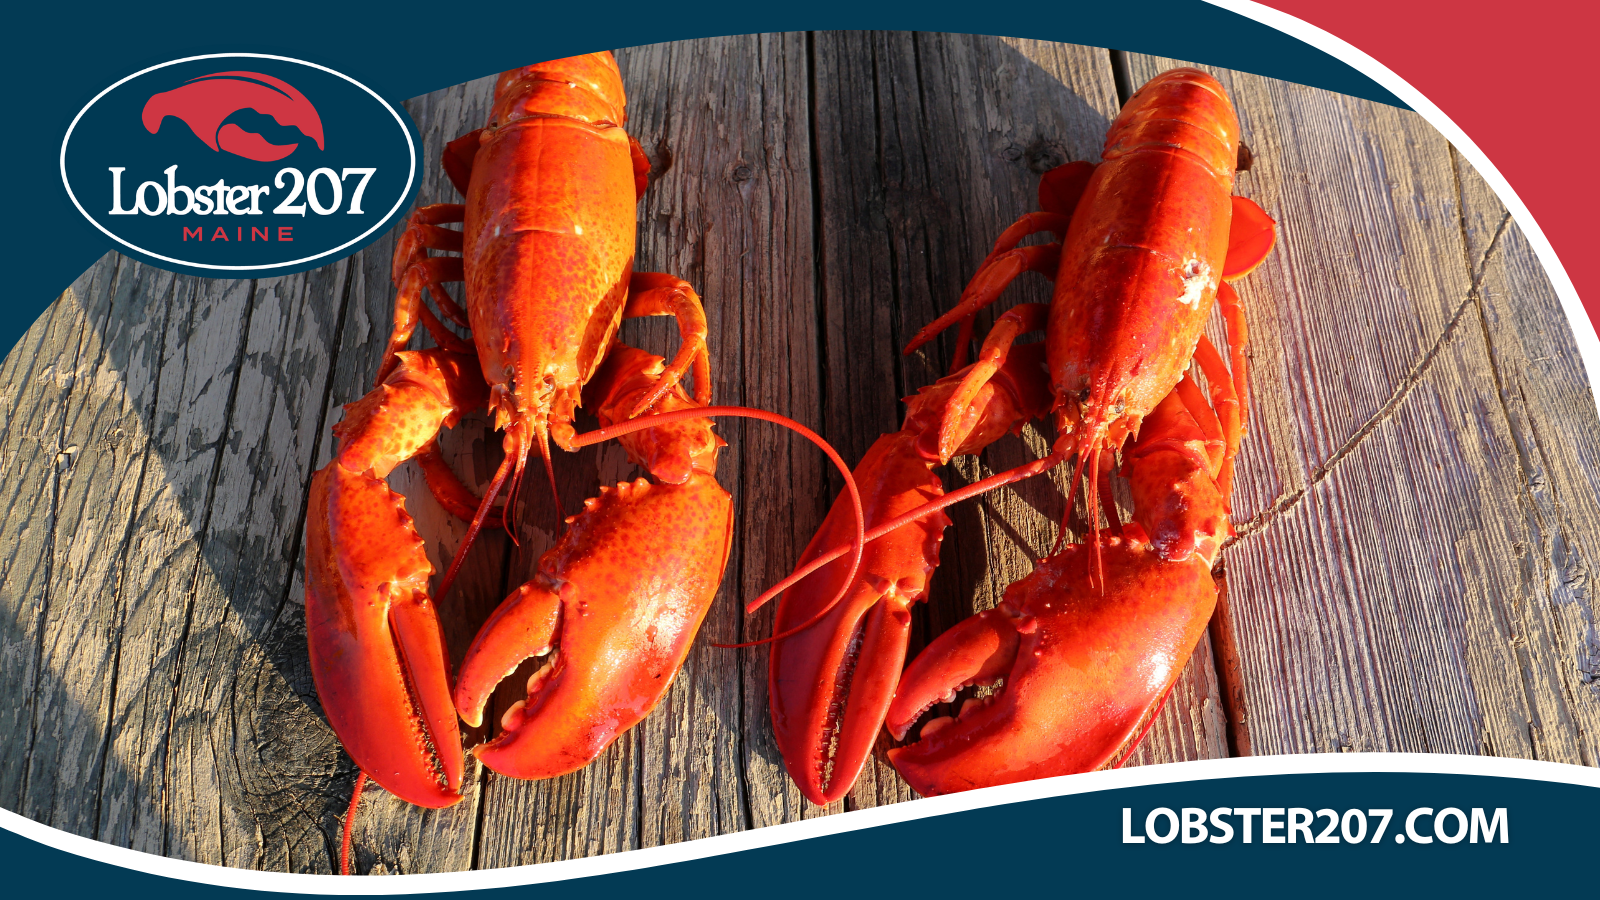 Special Offer for IAM Fresh Maine Lobster